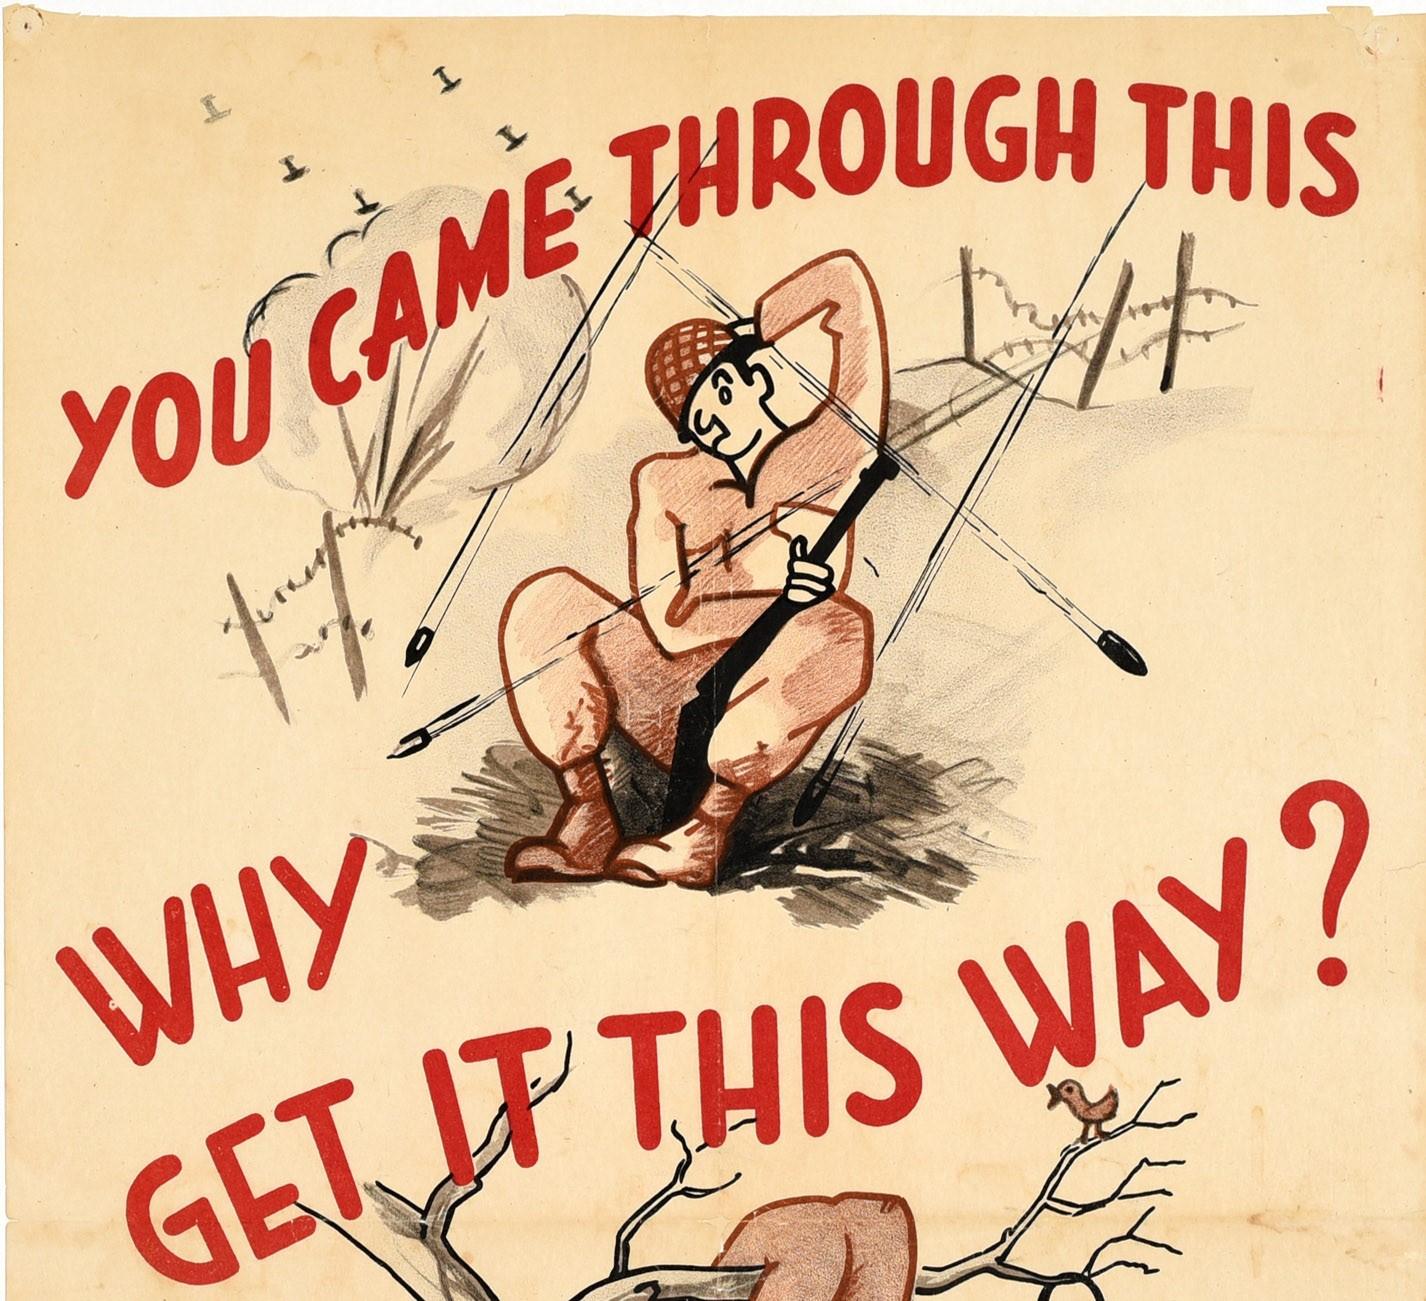 Original vintage WWII period road safety poster - You came through this Why get it this way? Be Careful! - featuring a cartoon design depicting a soldier in uniform holding a gun next to a barbed wire fence and taking cover from bullets firing